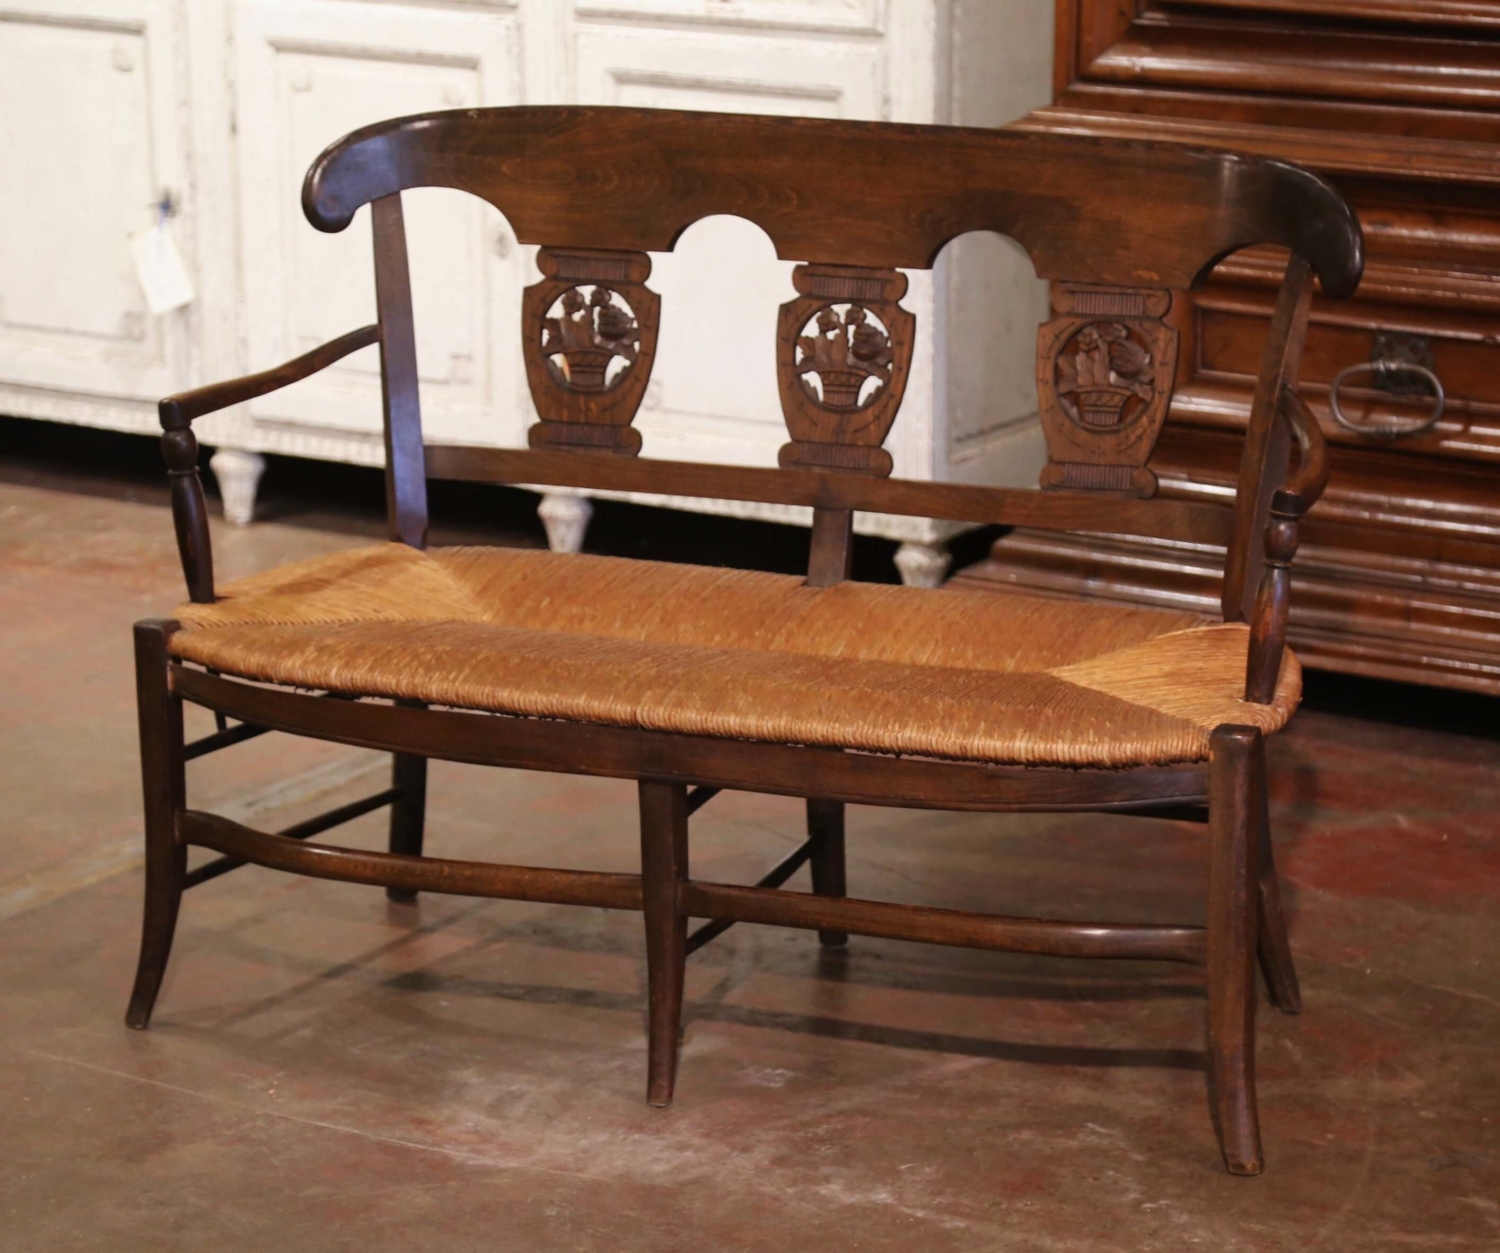 19th Century French Settee Beech - and Carved Normandy Country Wood Rush Bench from Interiors French